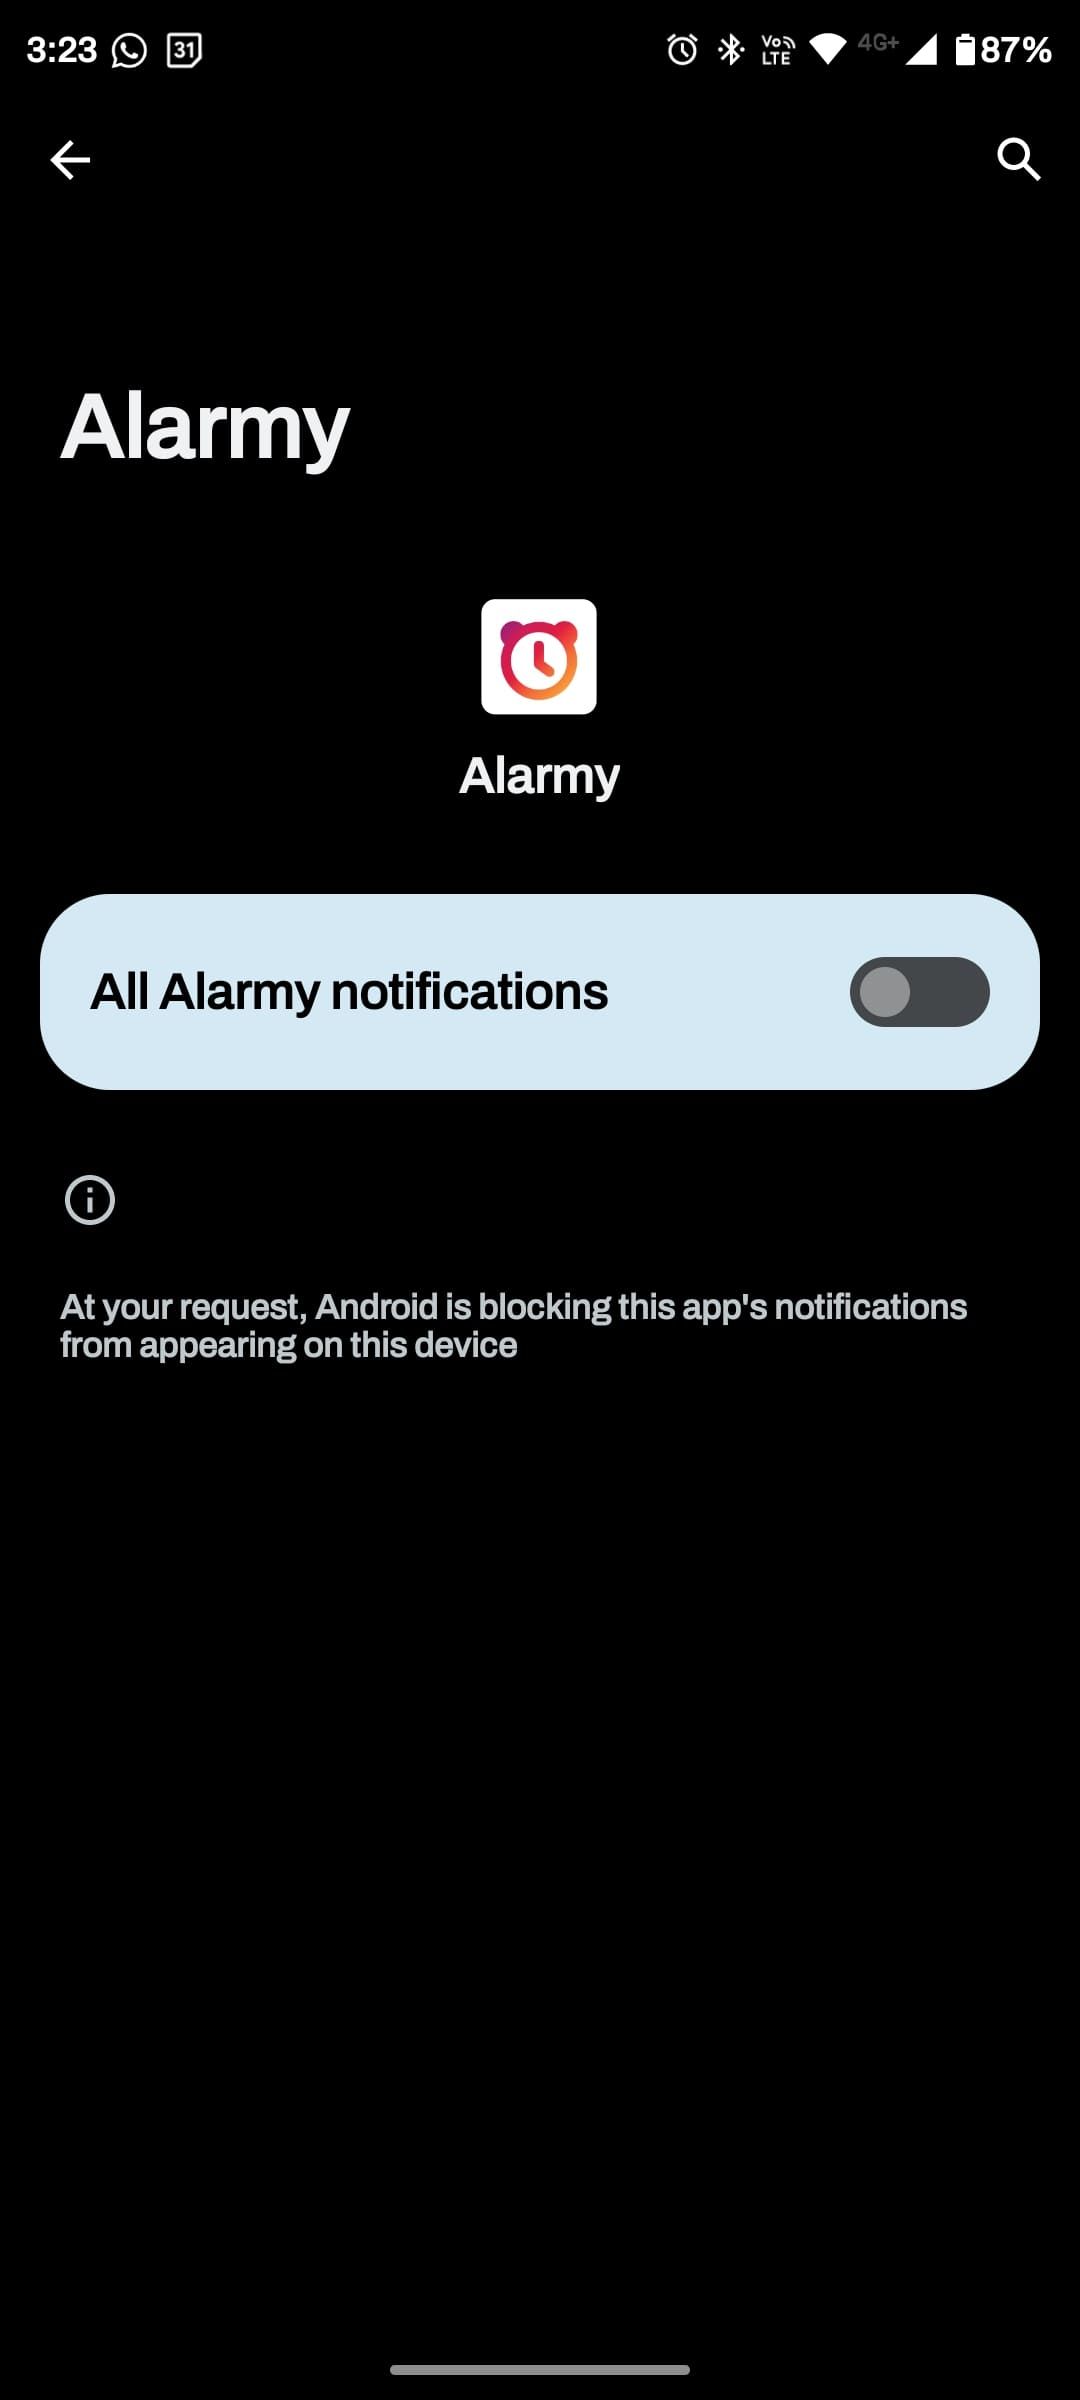 Alarmy app notifications toggled off